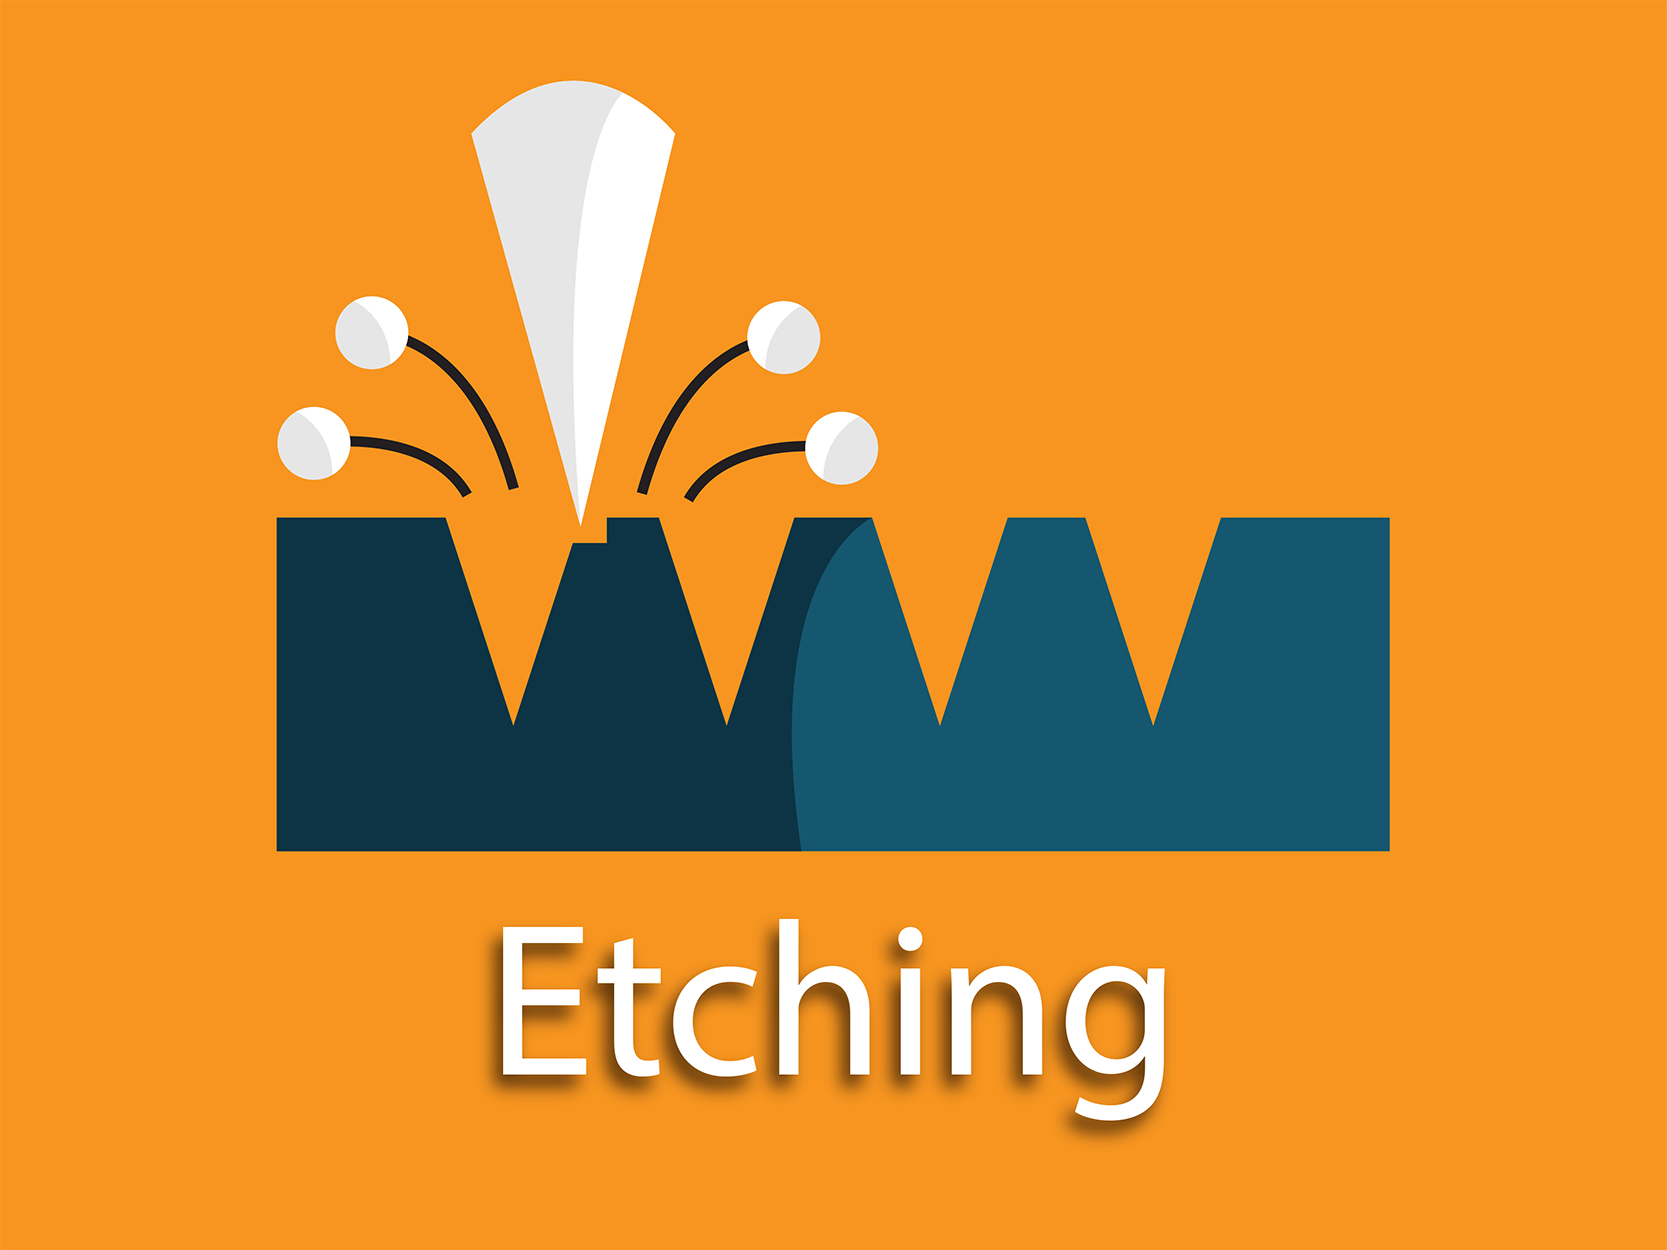 Click here to see the full list of etching tools